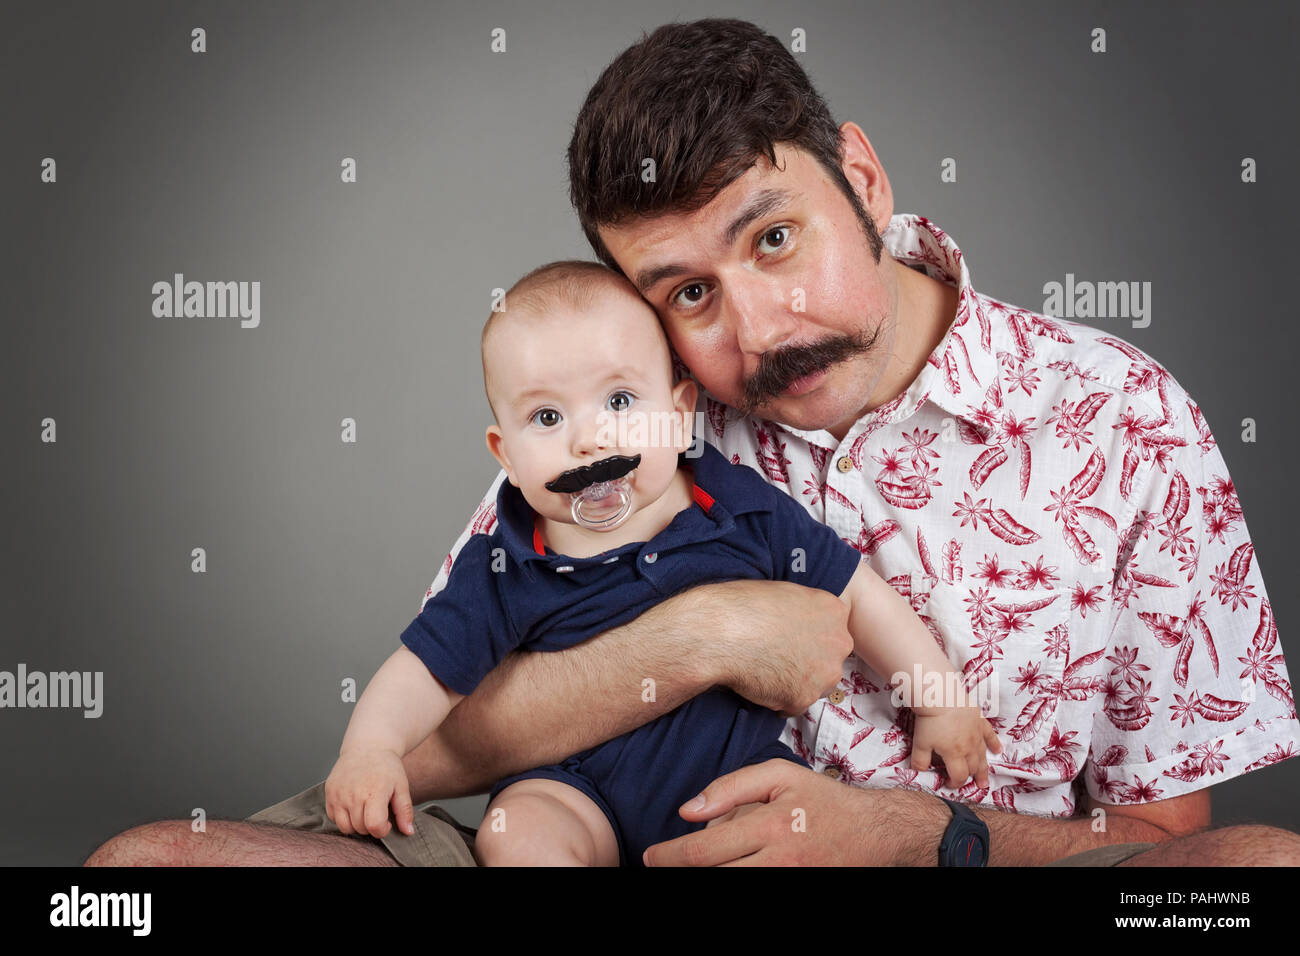 Handlebar Mustache family tradition-Funny portrait of Father and a son both with Handlebar mustaches, looking surprised towards the camera, horizontal Stock Photo